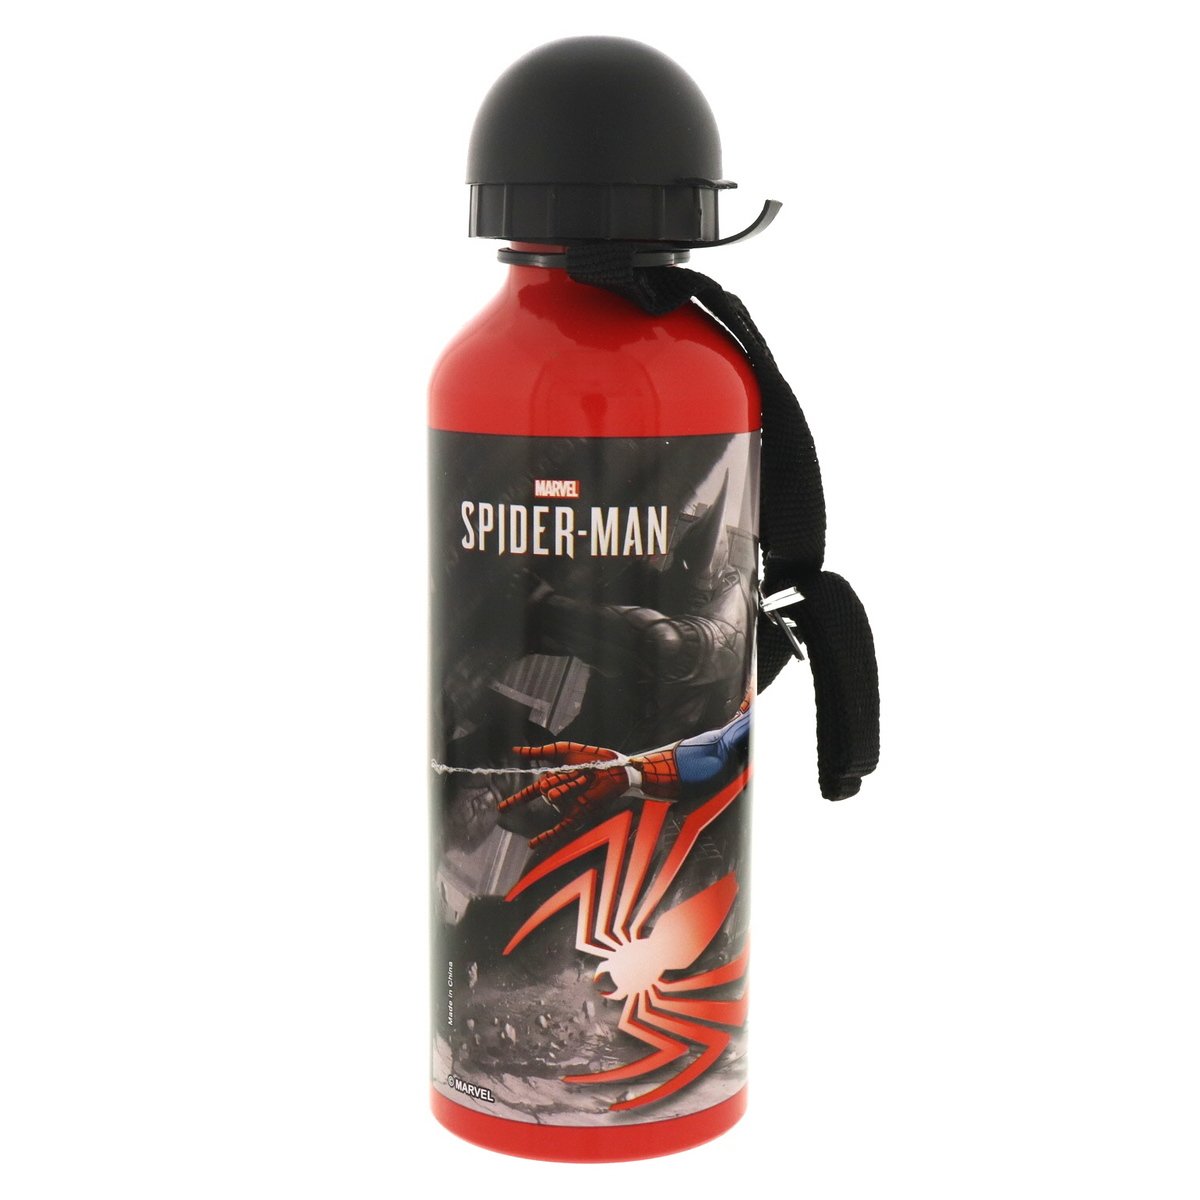 Spiderman With Bottle 112-15-0917